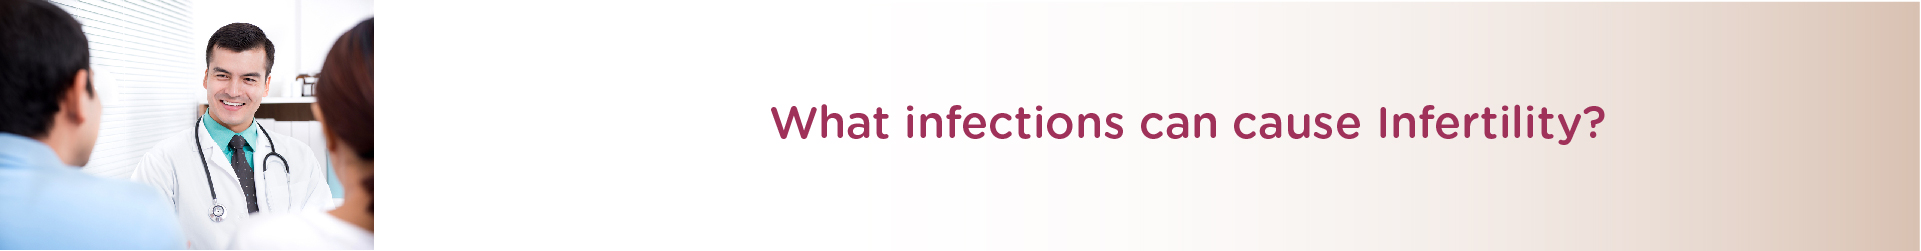 What Infections Can Cause Infertility?